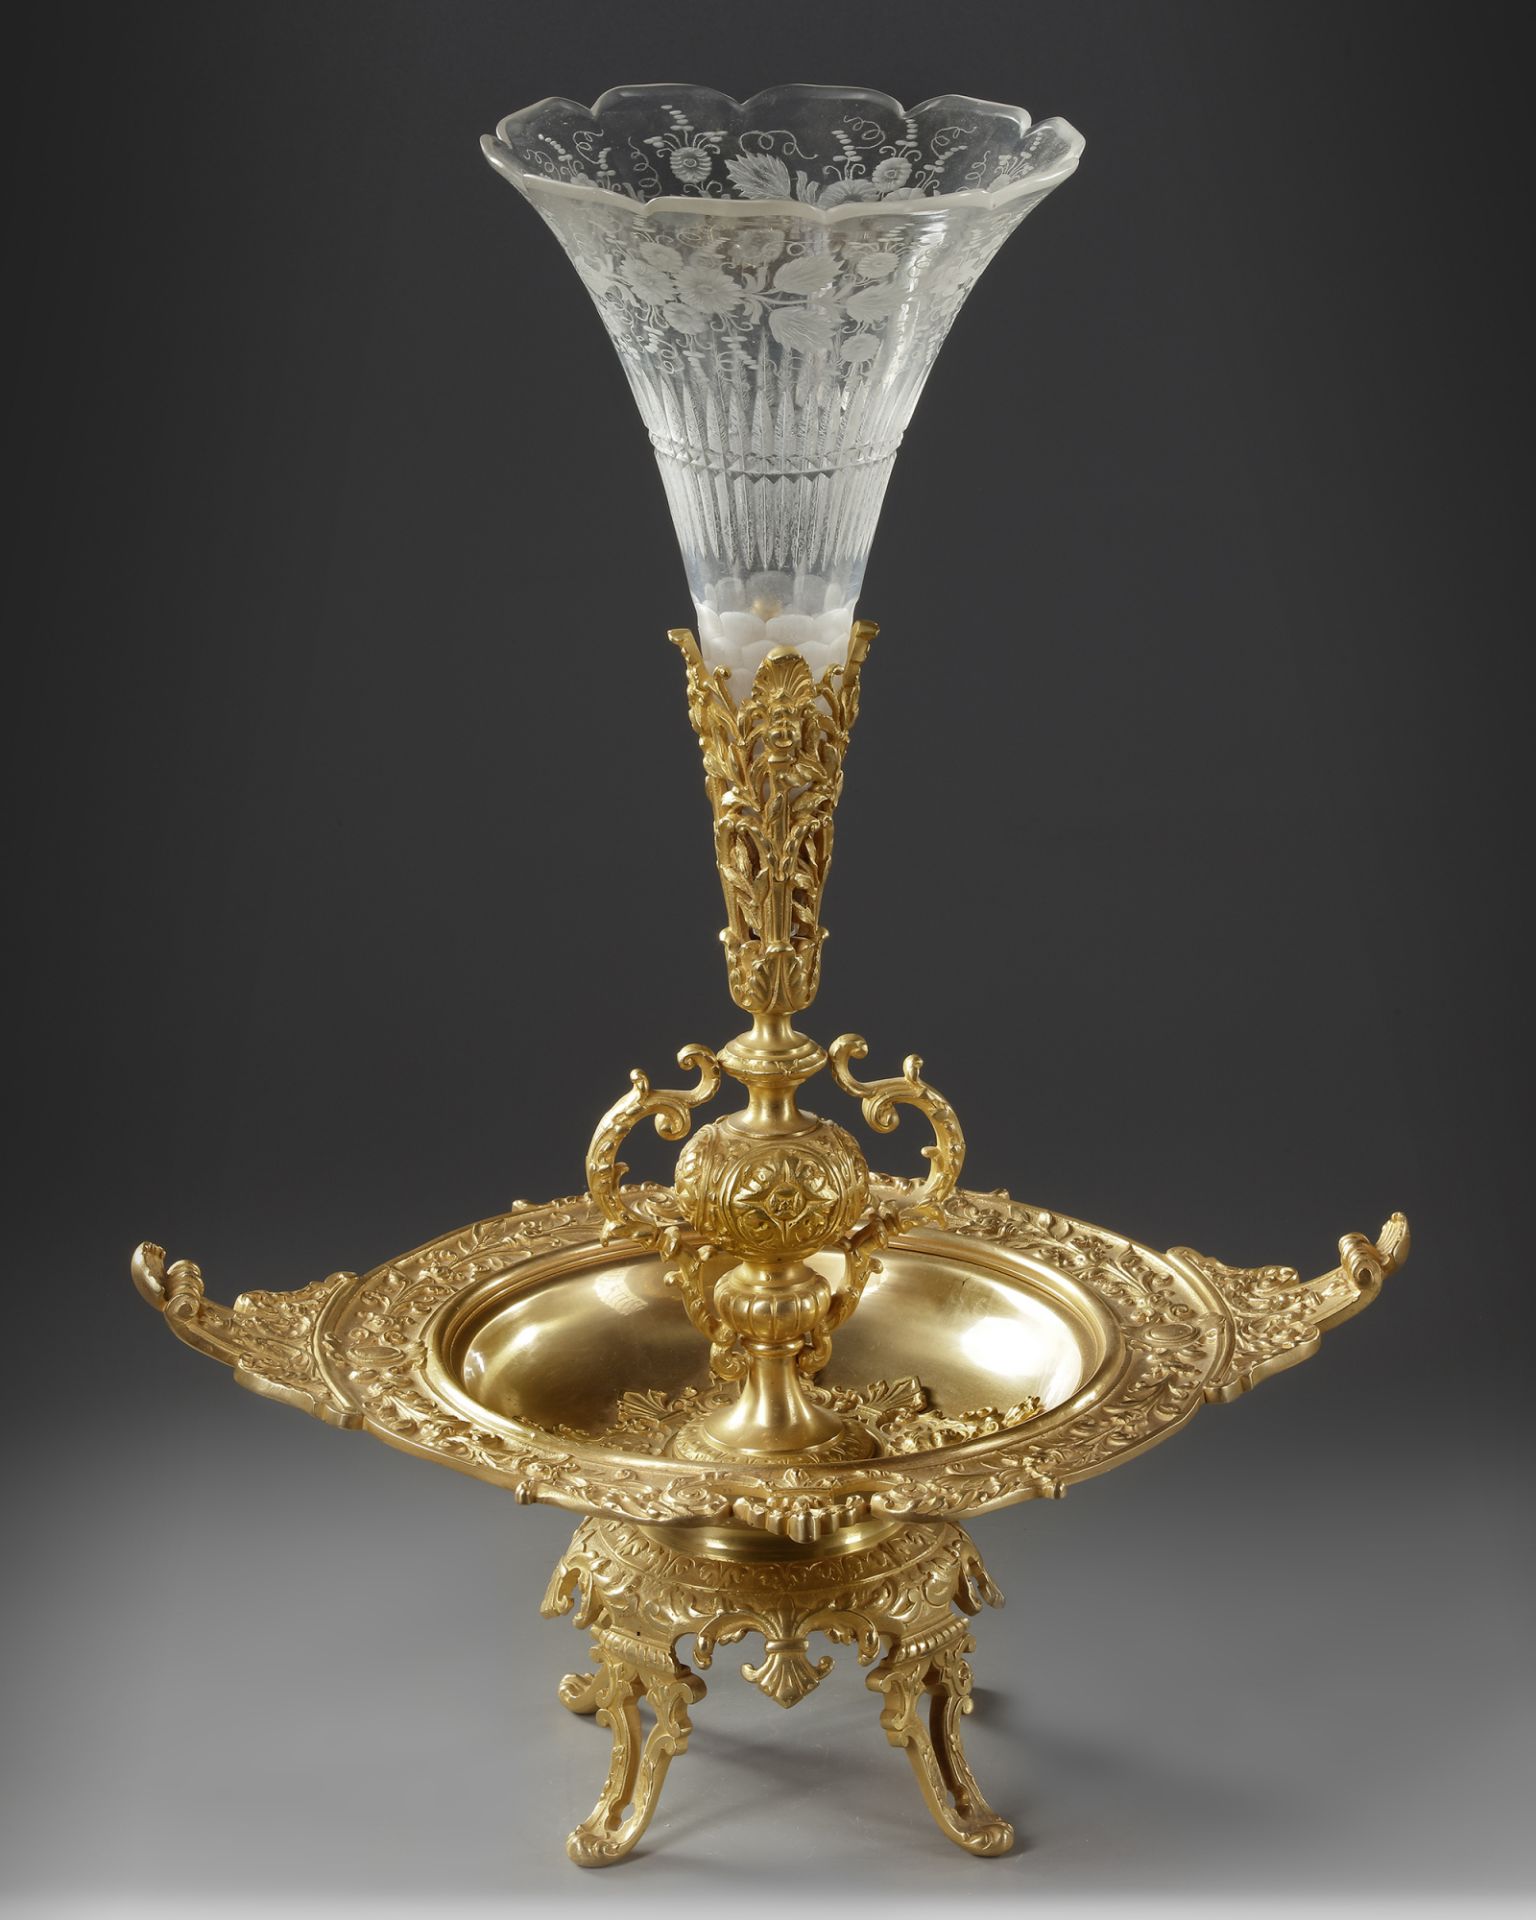 A SOLIFLORE CENTERPIECE, LATE 19TH CENTURY - Image 2 of 3